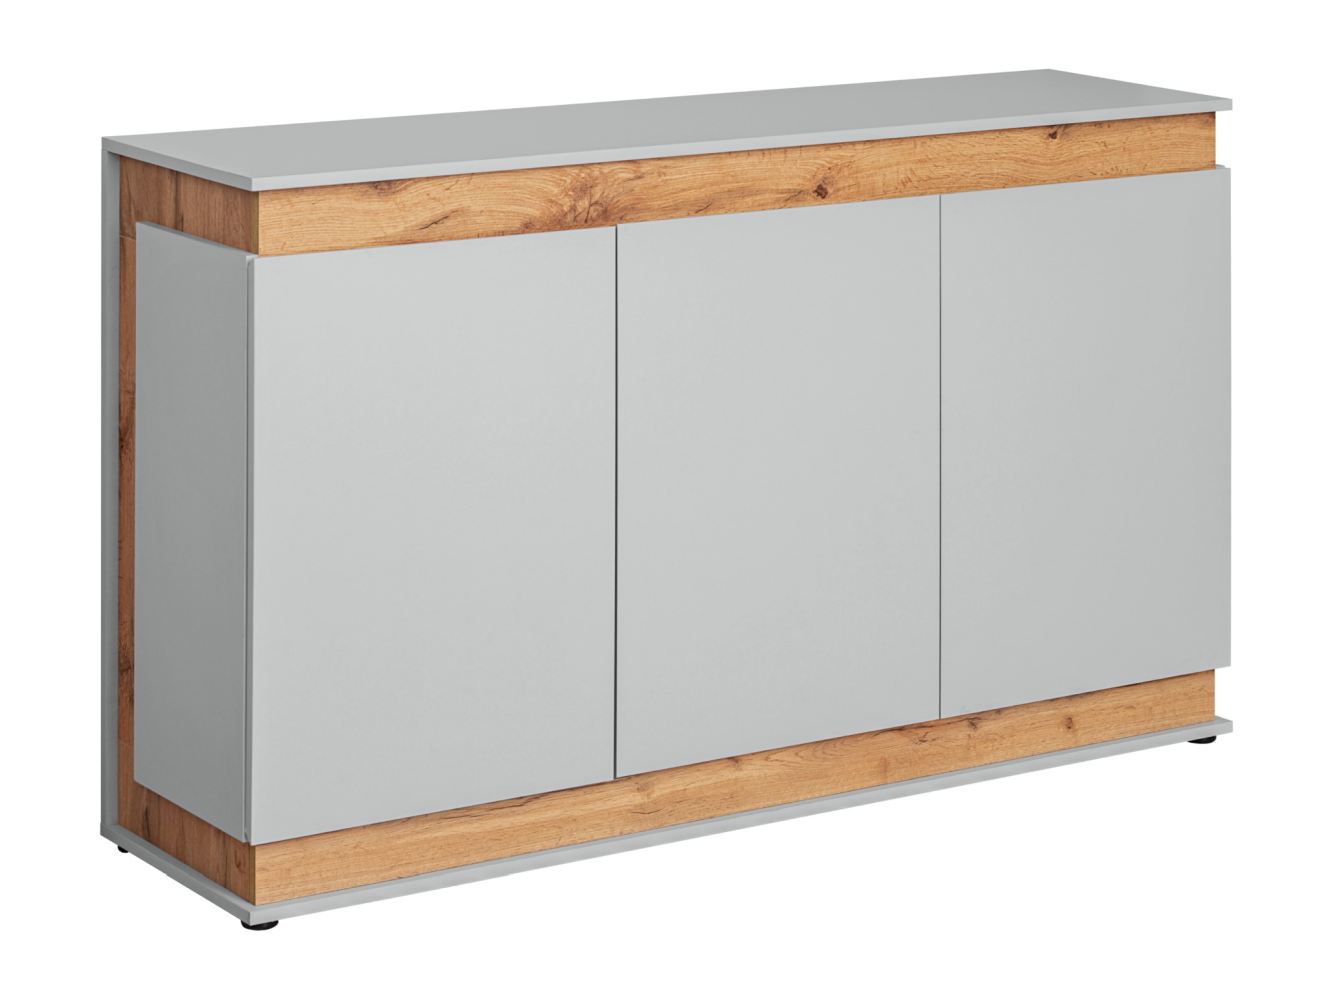 Chest of drawers / sideboard Asheim 06, color: grey / oak Artisan - Dimensions: 91 x 150 x 40 cm (H x W x D), with six compartments